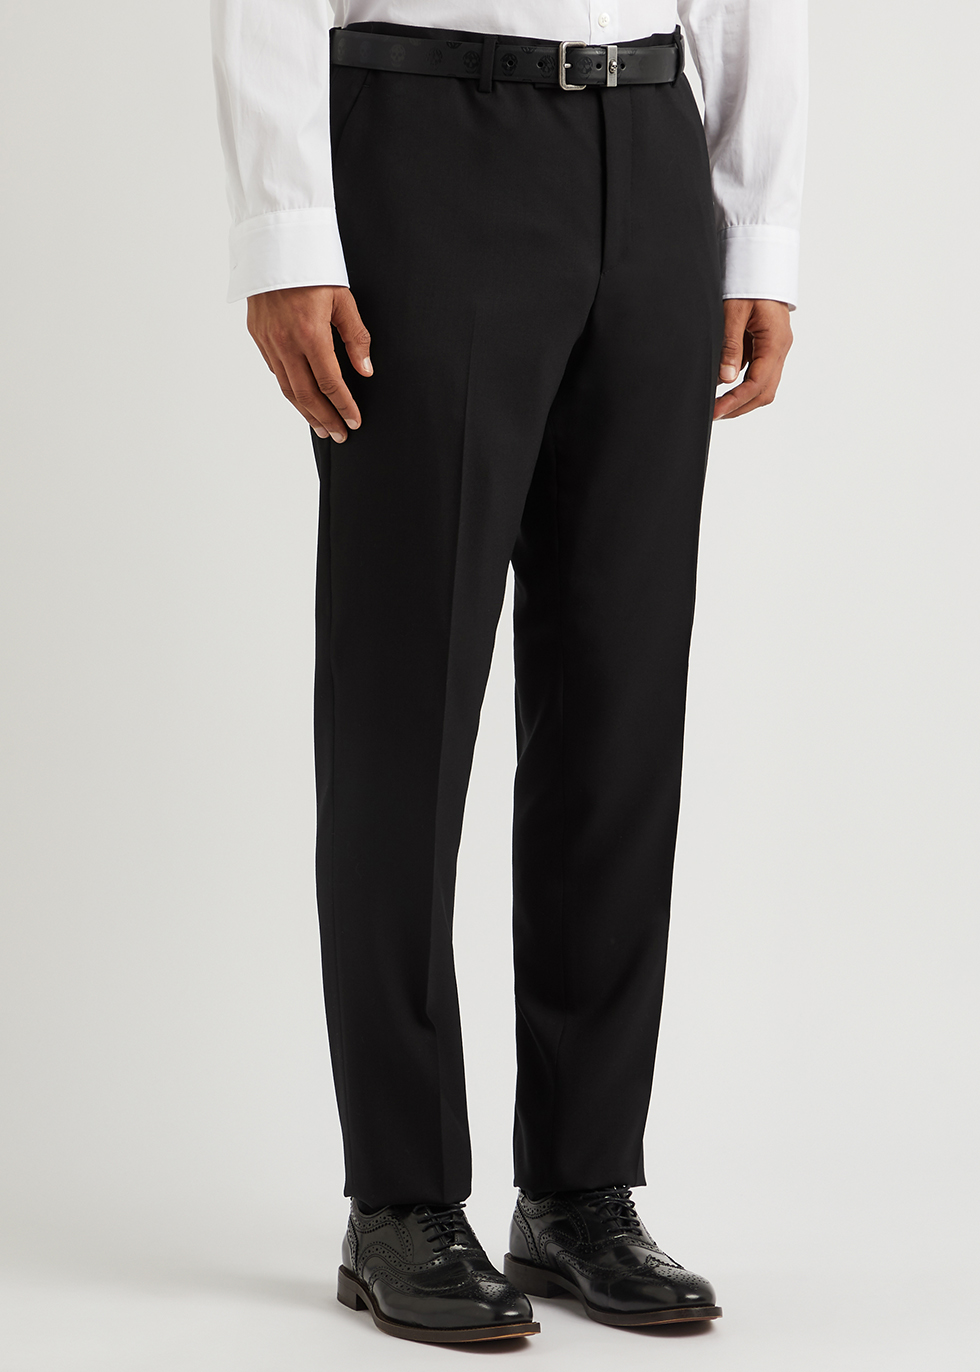 Buy Paul Smith Formal Trousers online  Men  84 products  FASHIOLAin